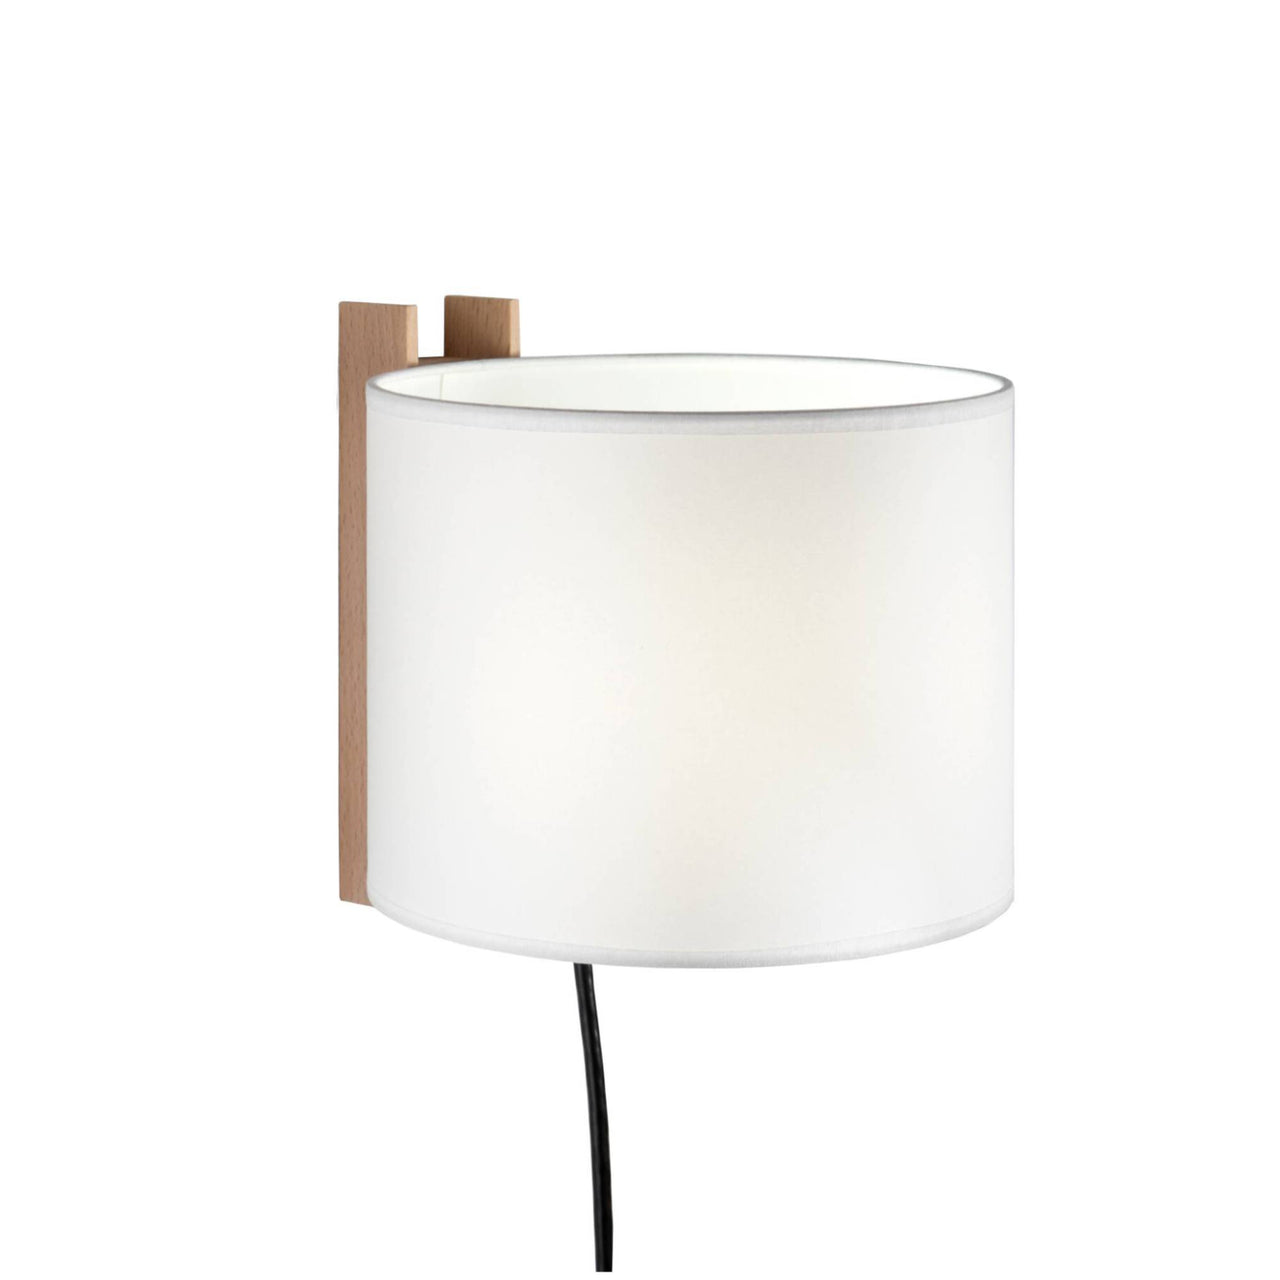 TMM Wall Lamp: Short + White + Beech + With Plug